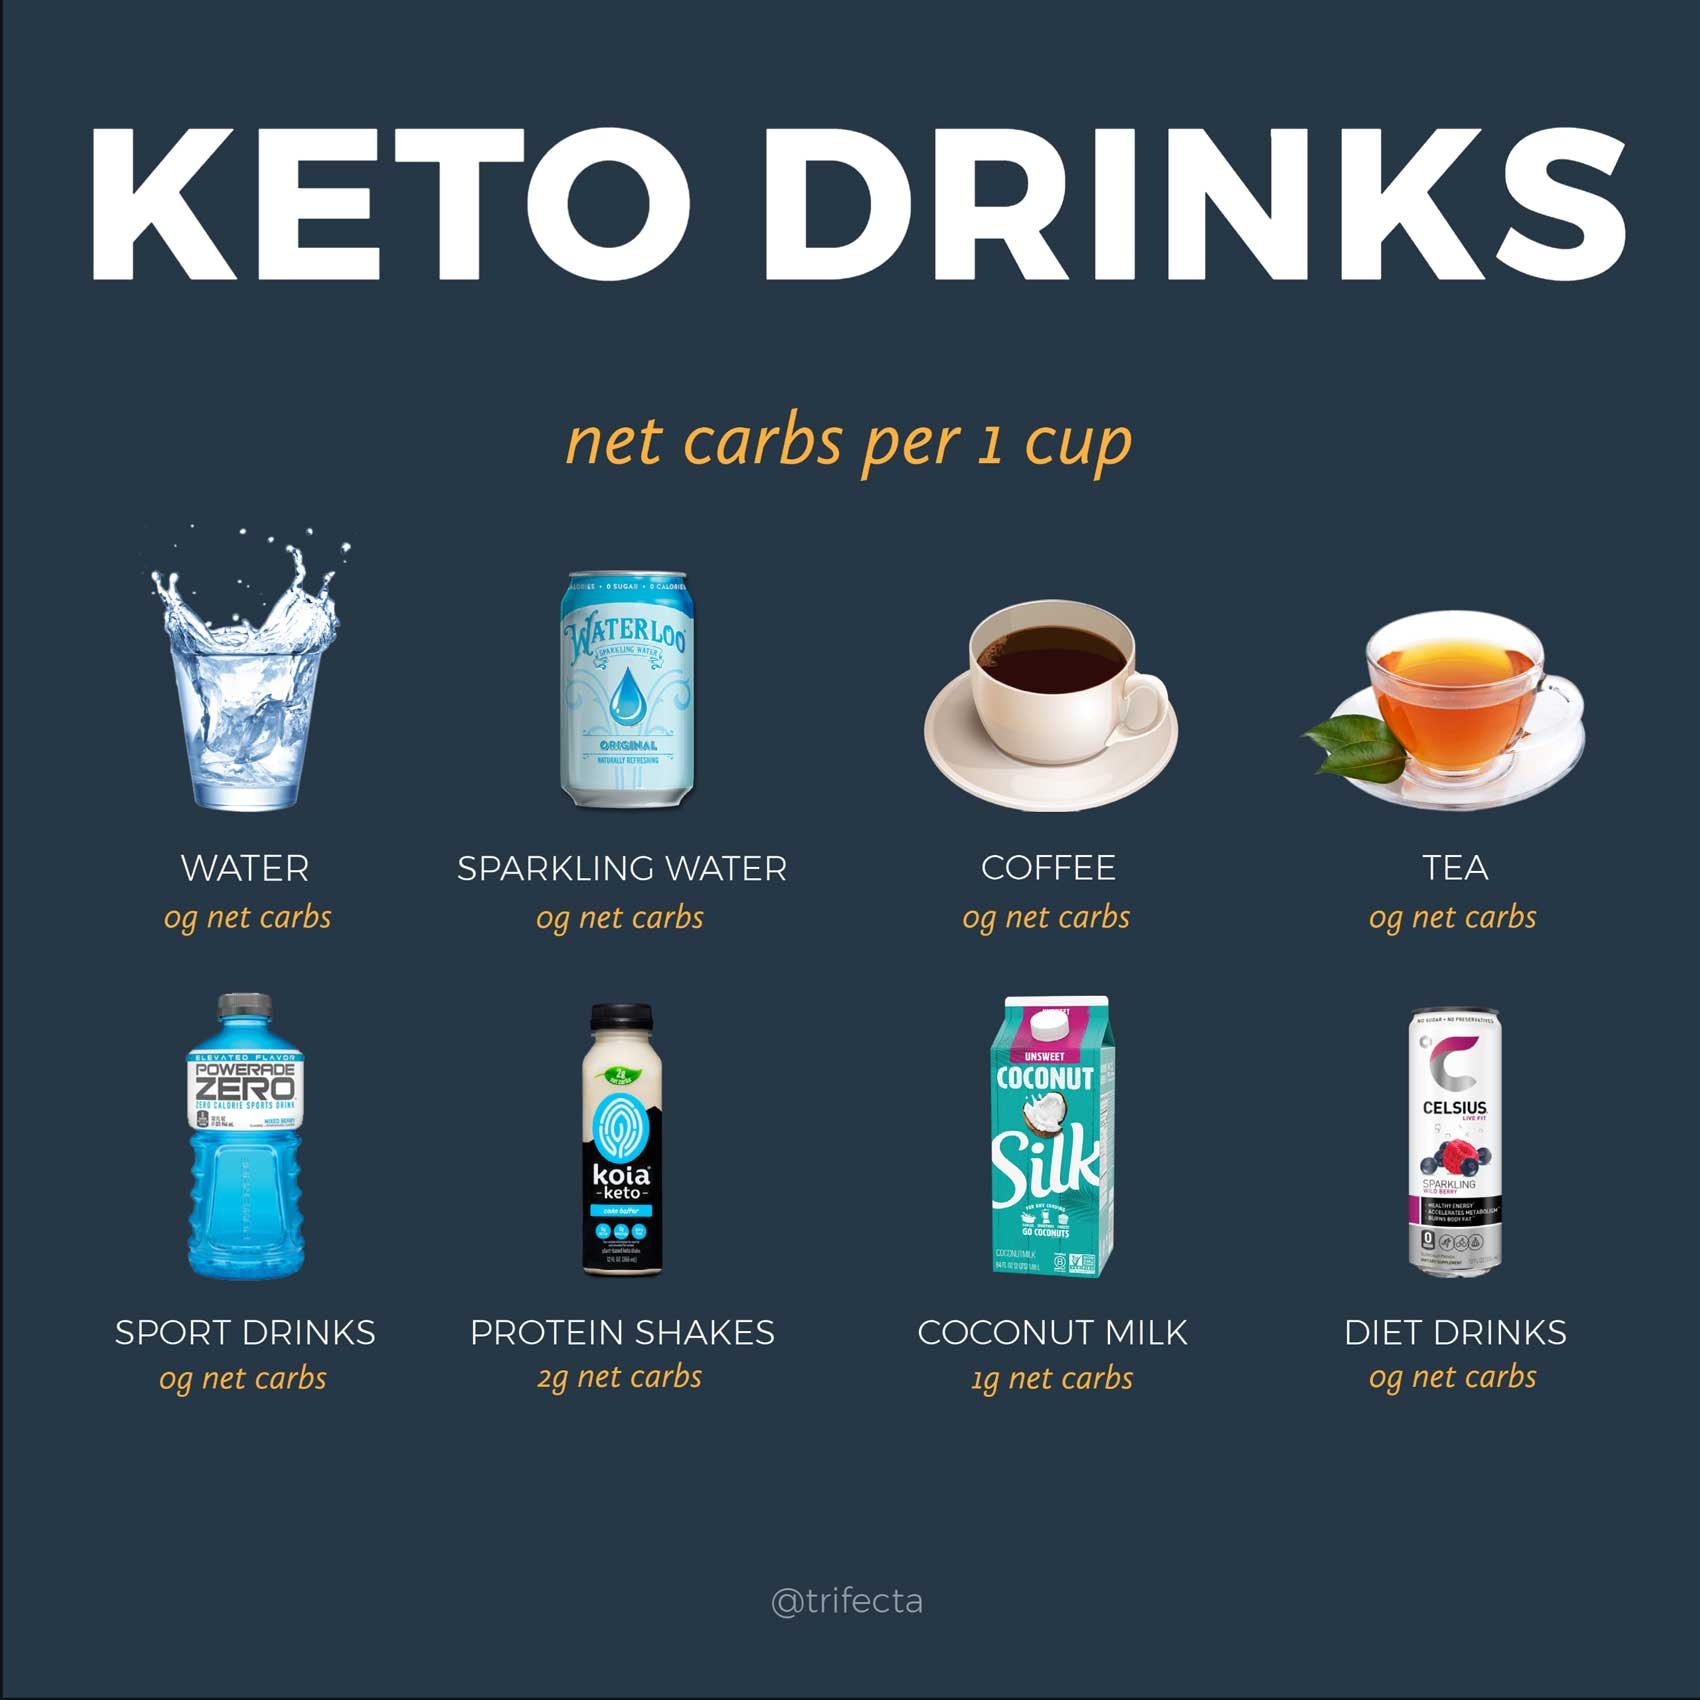 Keto Drinks - The 12 Best and Worst Low Carb Options to Sip On